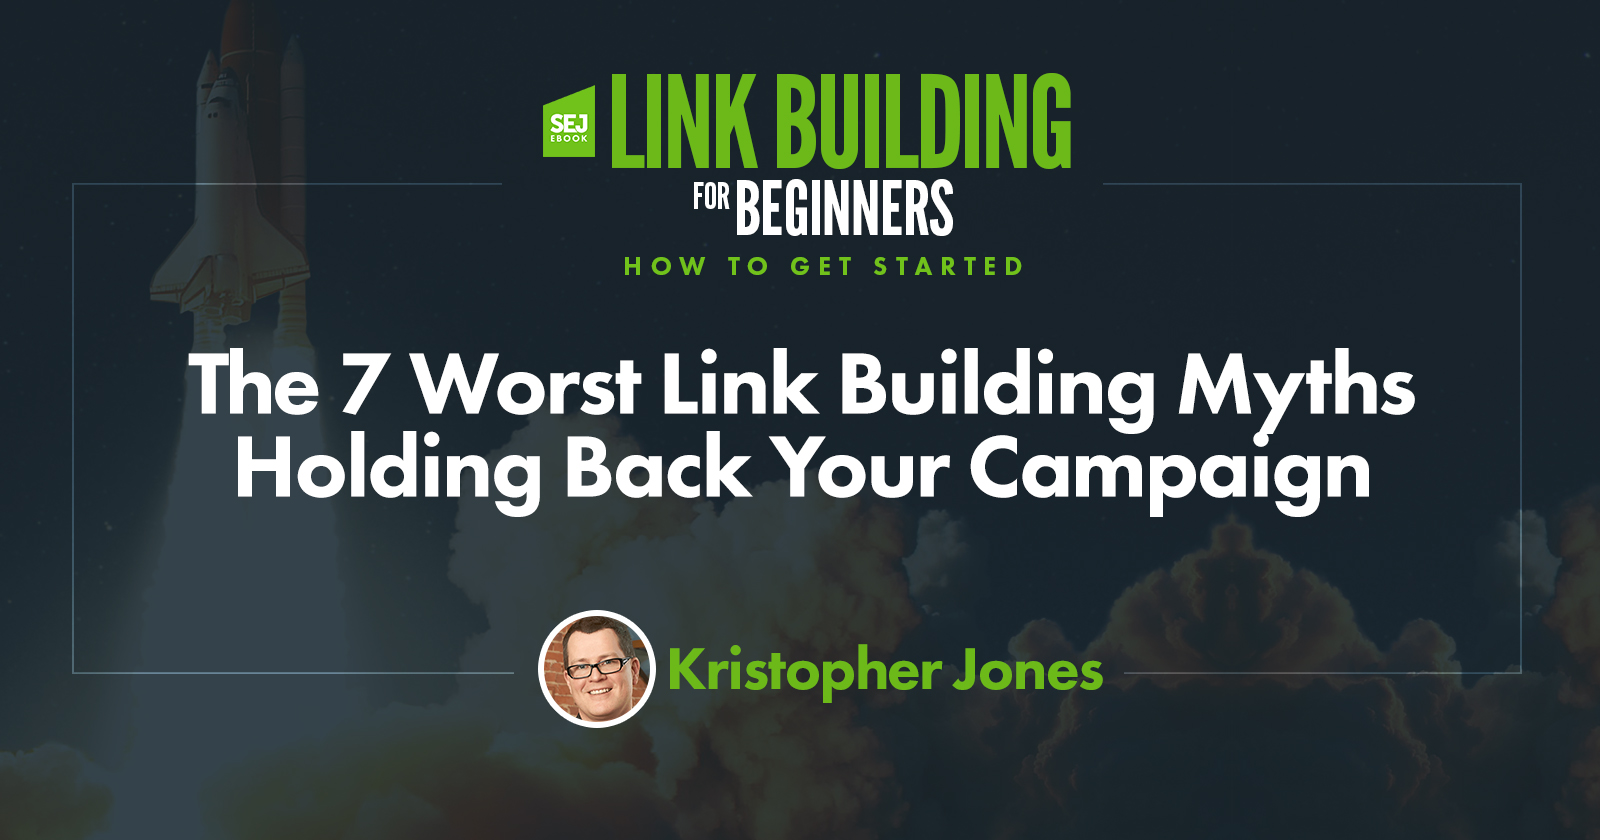 The 7 Worst Link Building Myths Holding Back Your Campaign